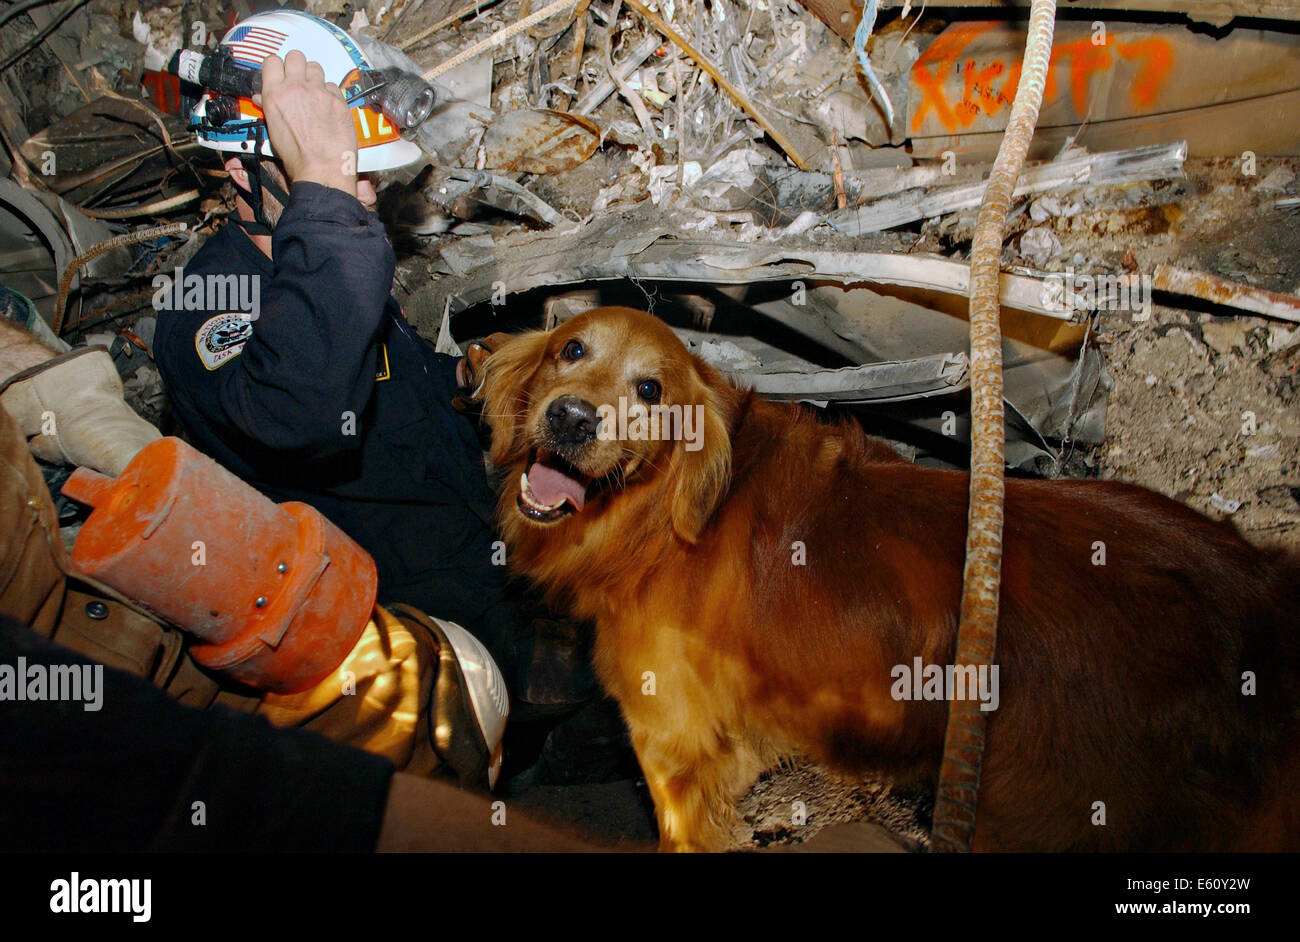 Kent Olson and his dog, Thunder search through the rubble for victims amongst the wreckage of the World Trade Center in the aftermath of a massive terrorist attack which destroyed the twin towers killing 2,606 people September 21, 2001 in New York, NY. Stock Photo